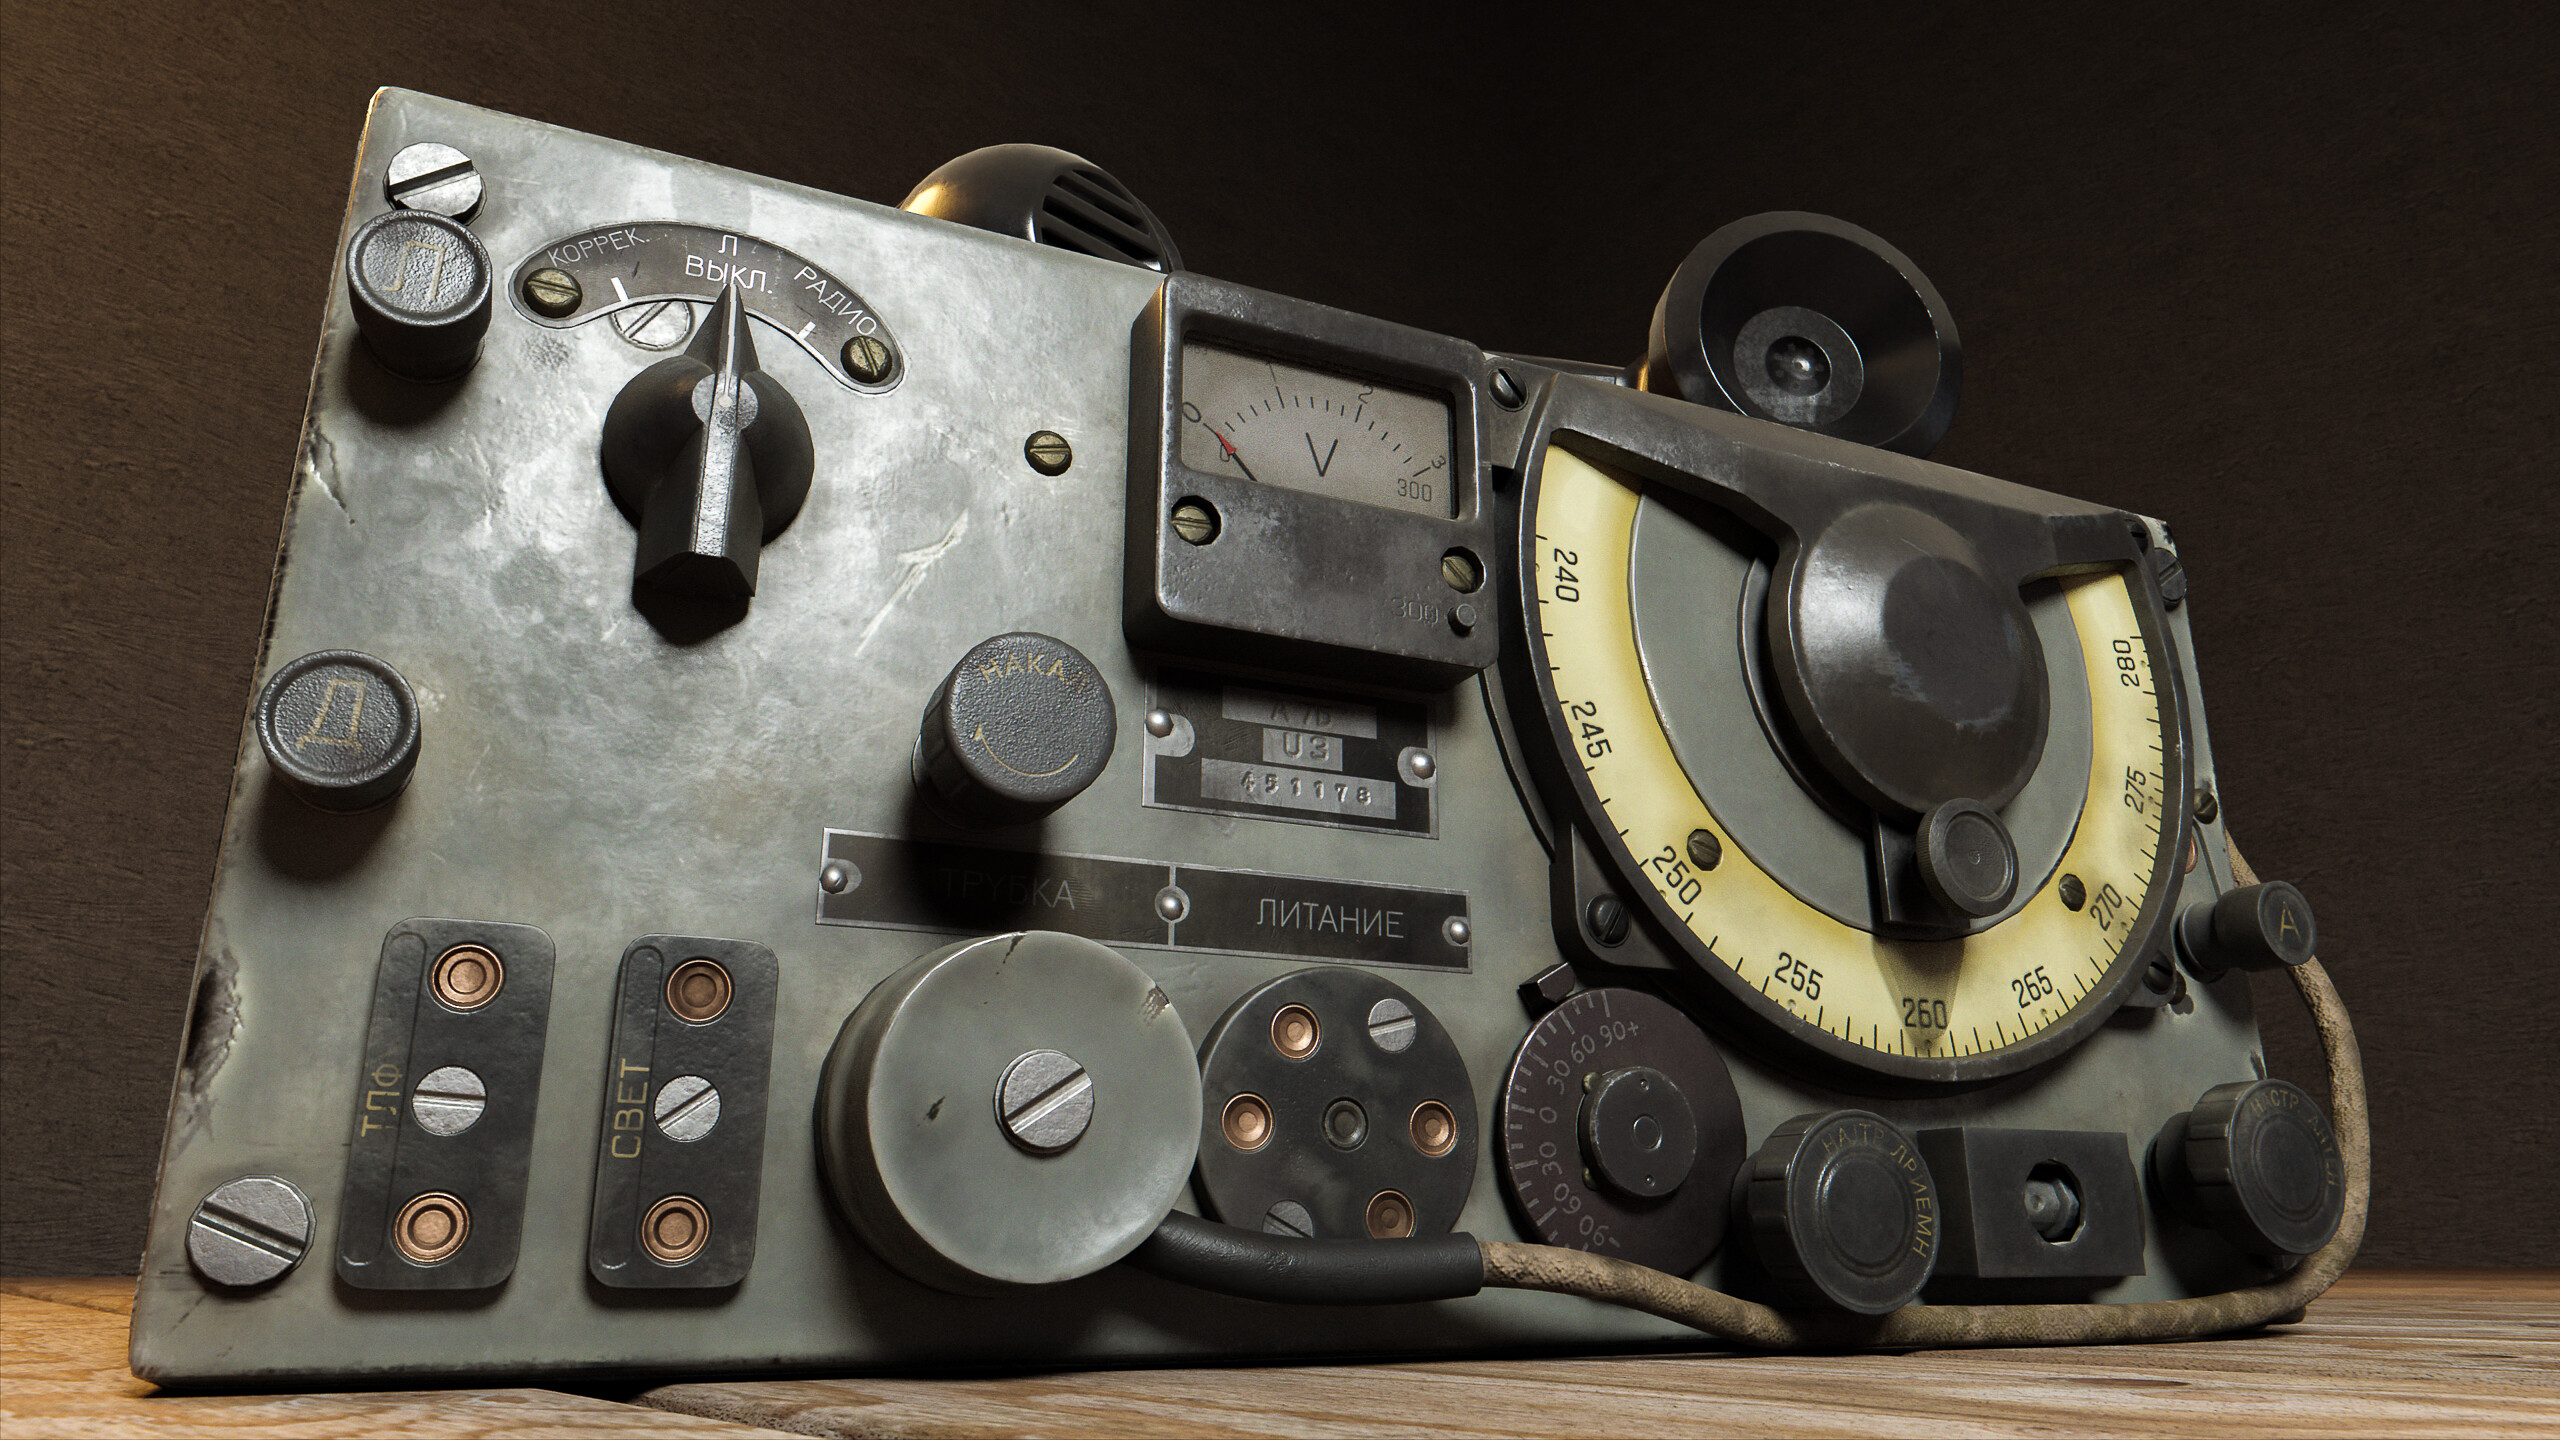 udsagnsord Wow Intens A7b military radio - Finished Projects - Blender Artists Community